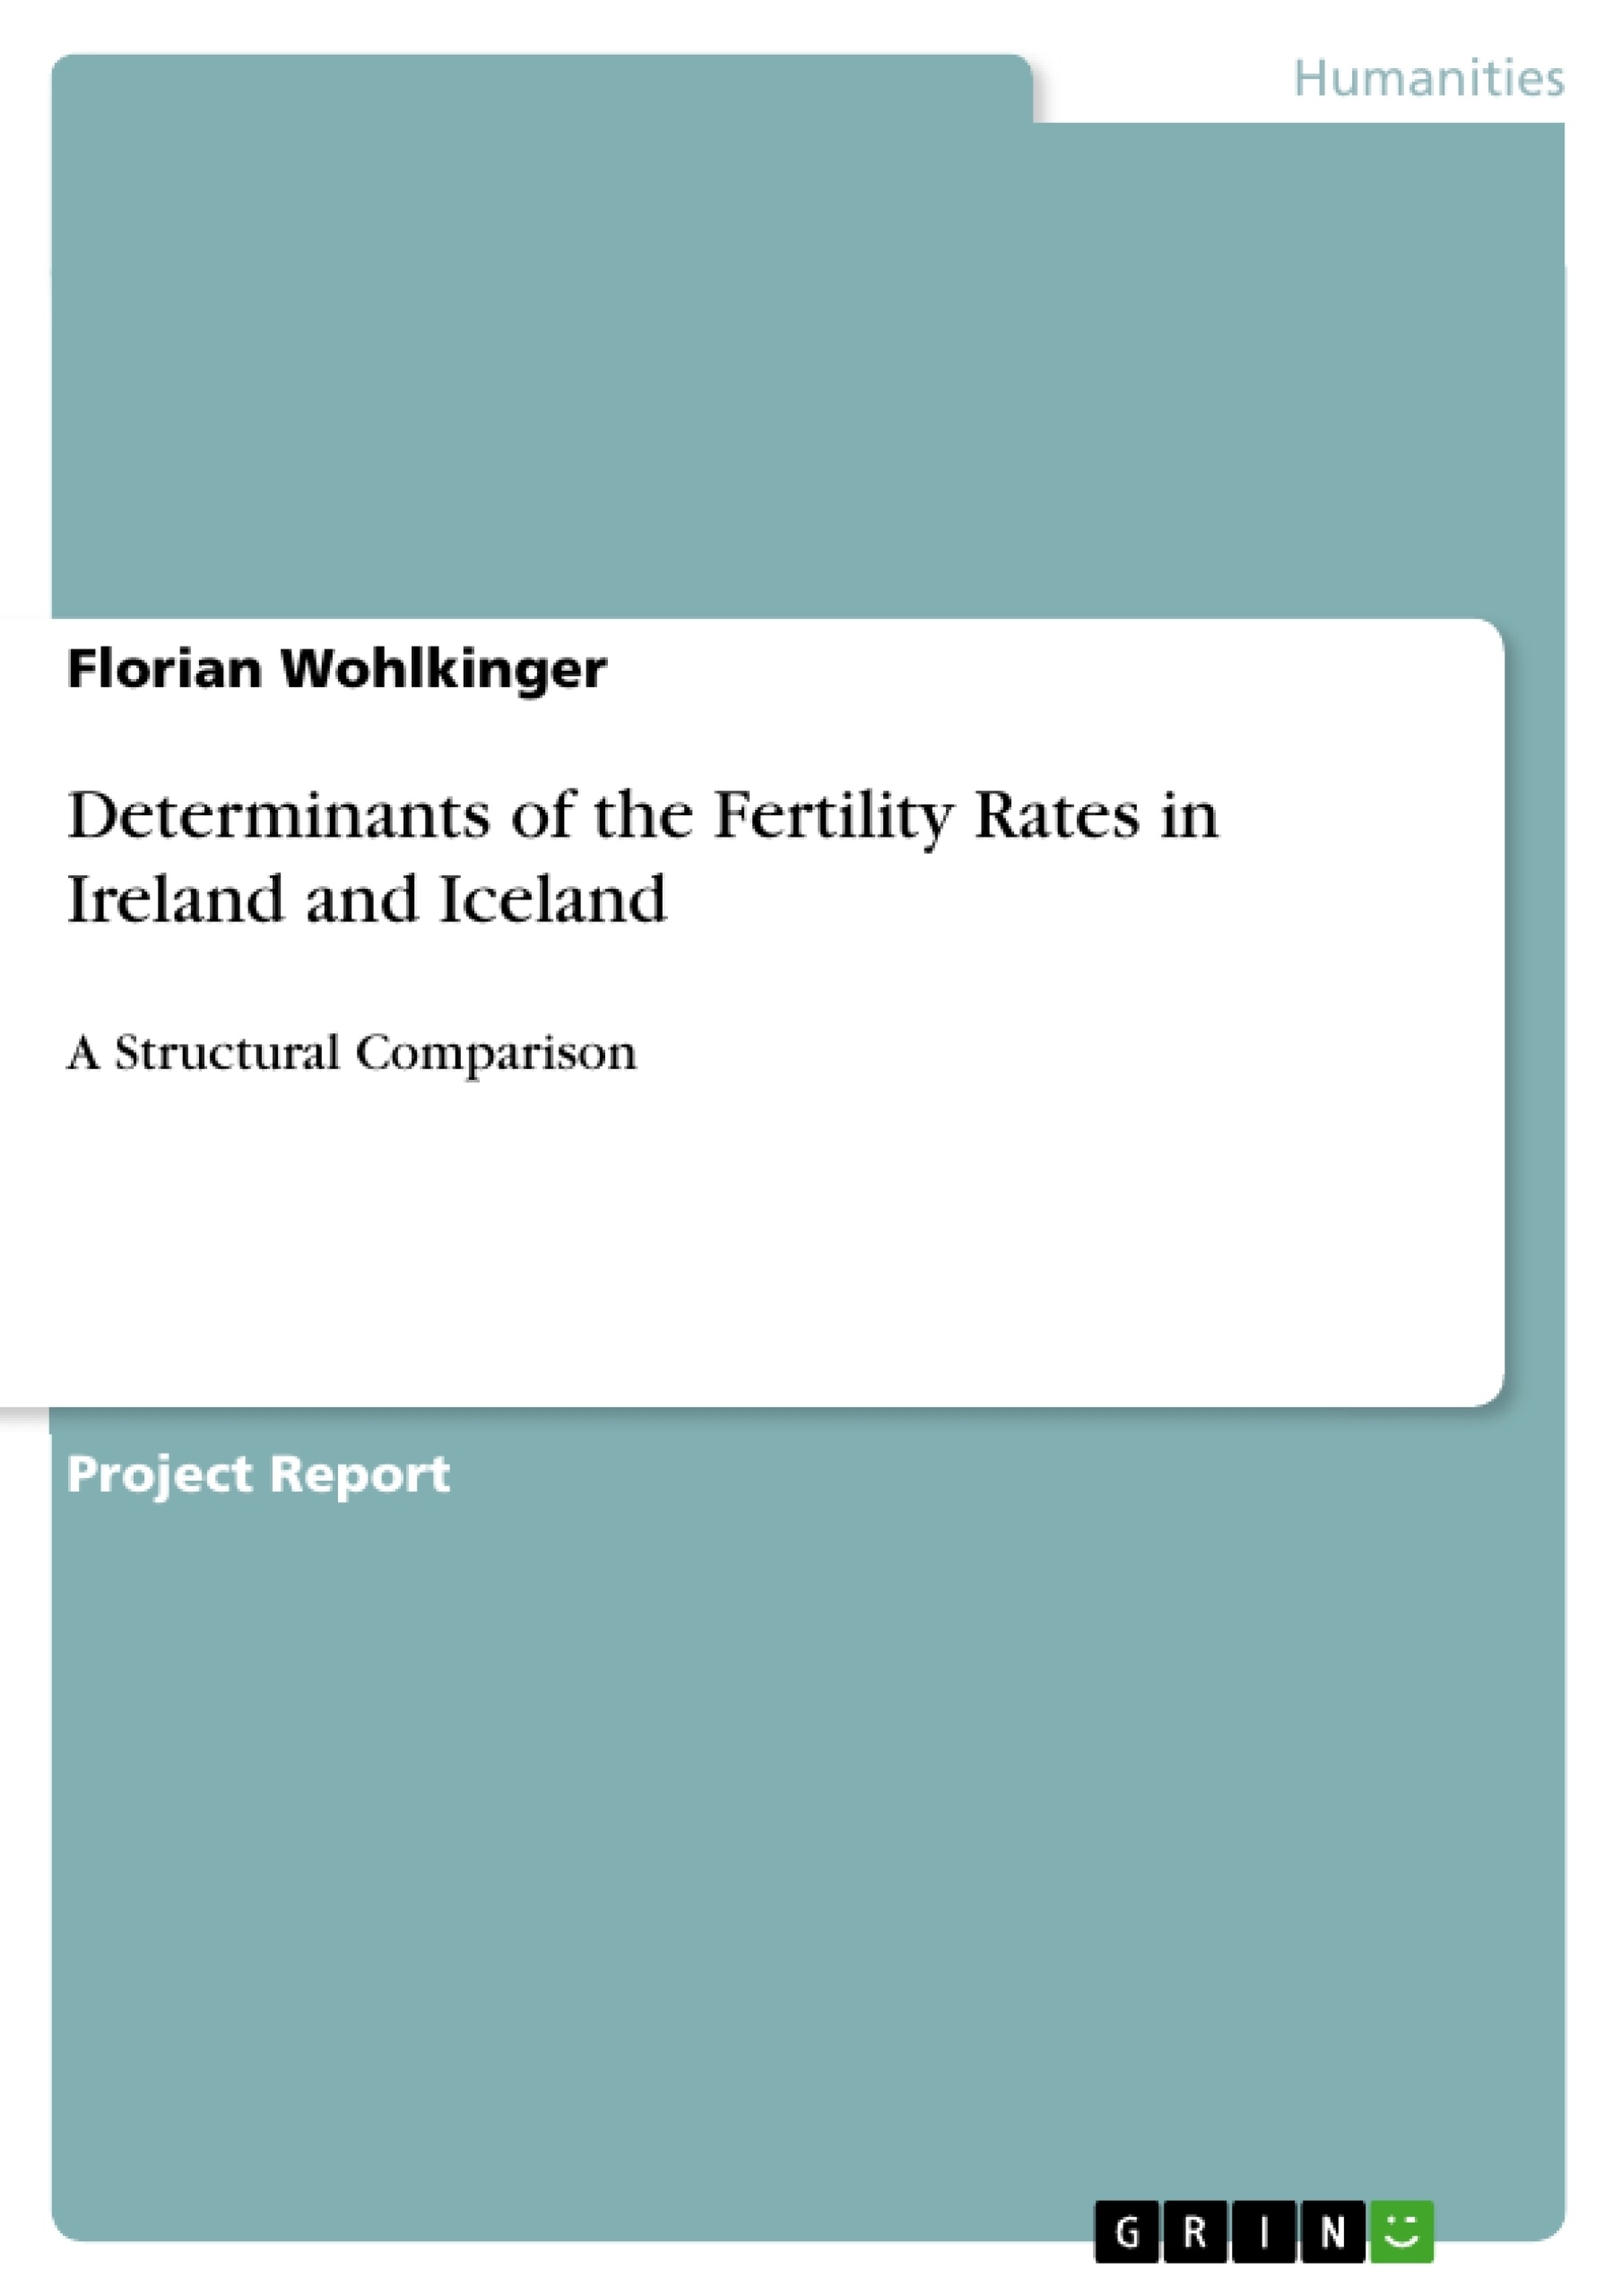 Title: Determinants of the Fertility Rates in Ireland and Iceland